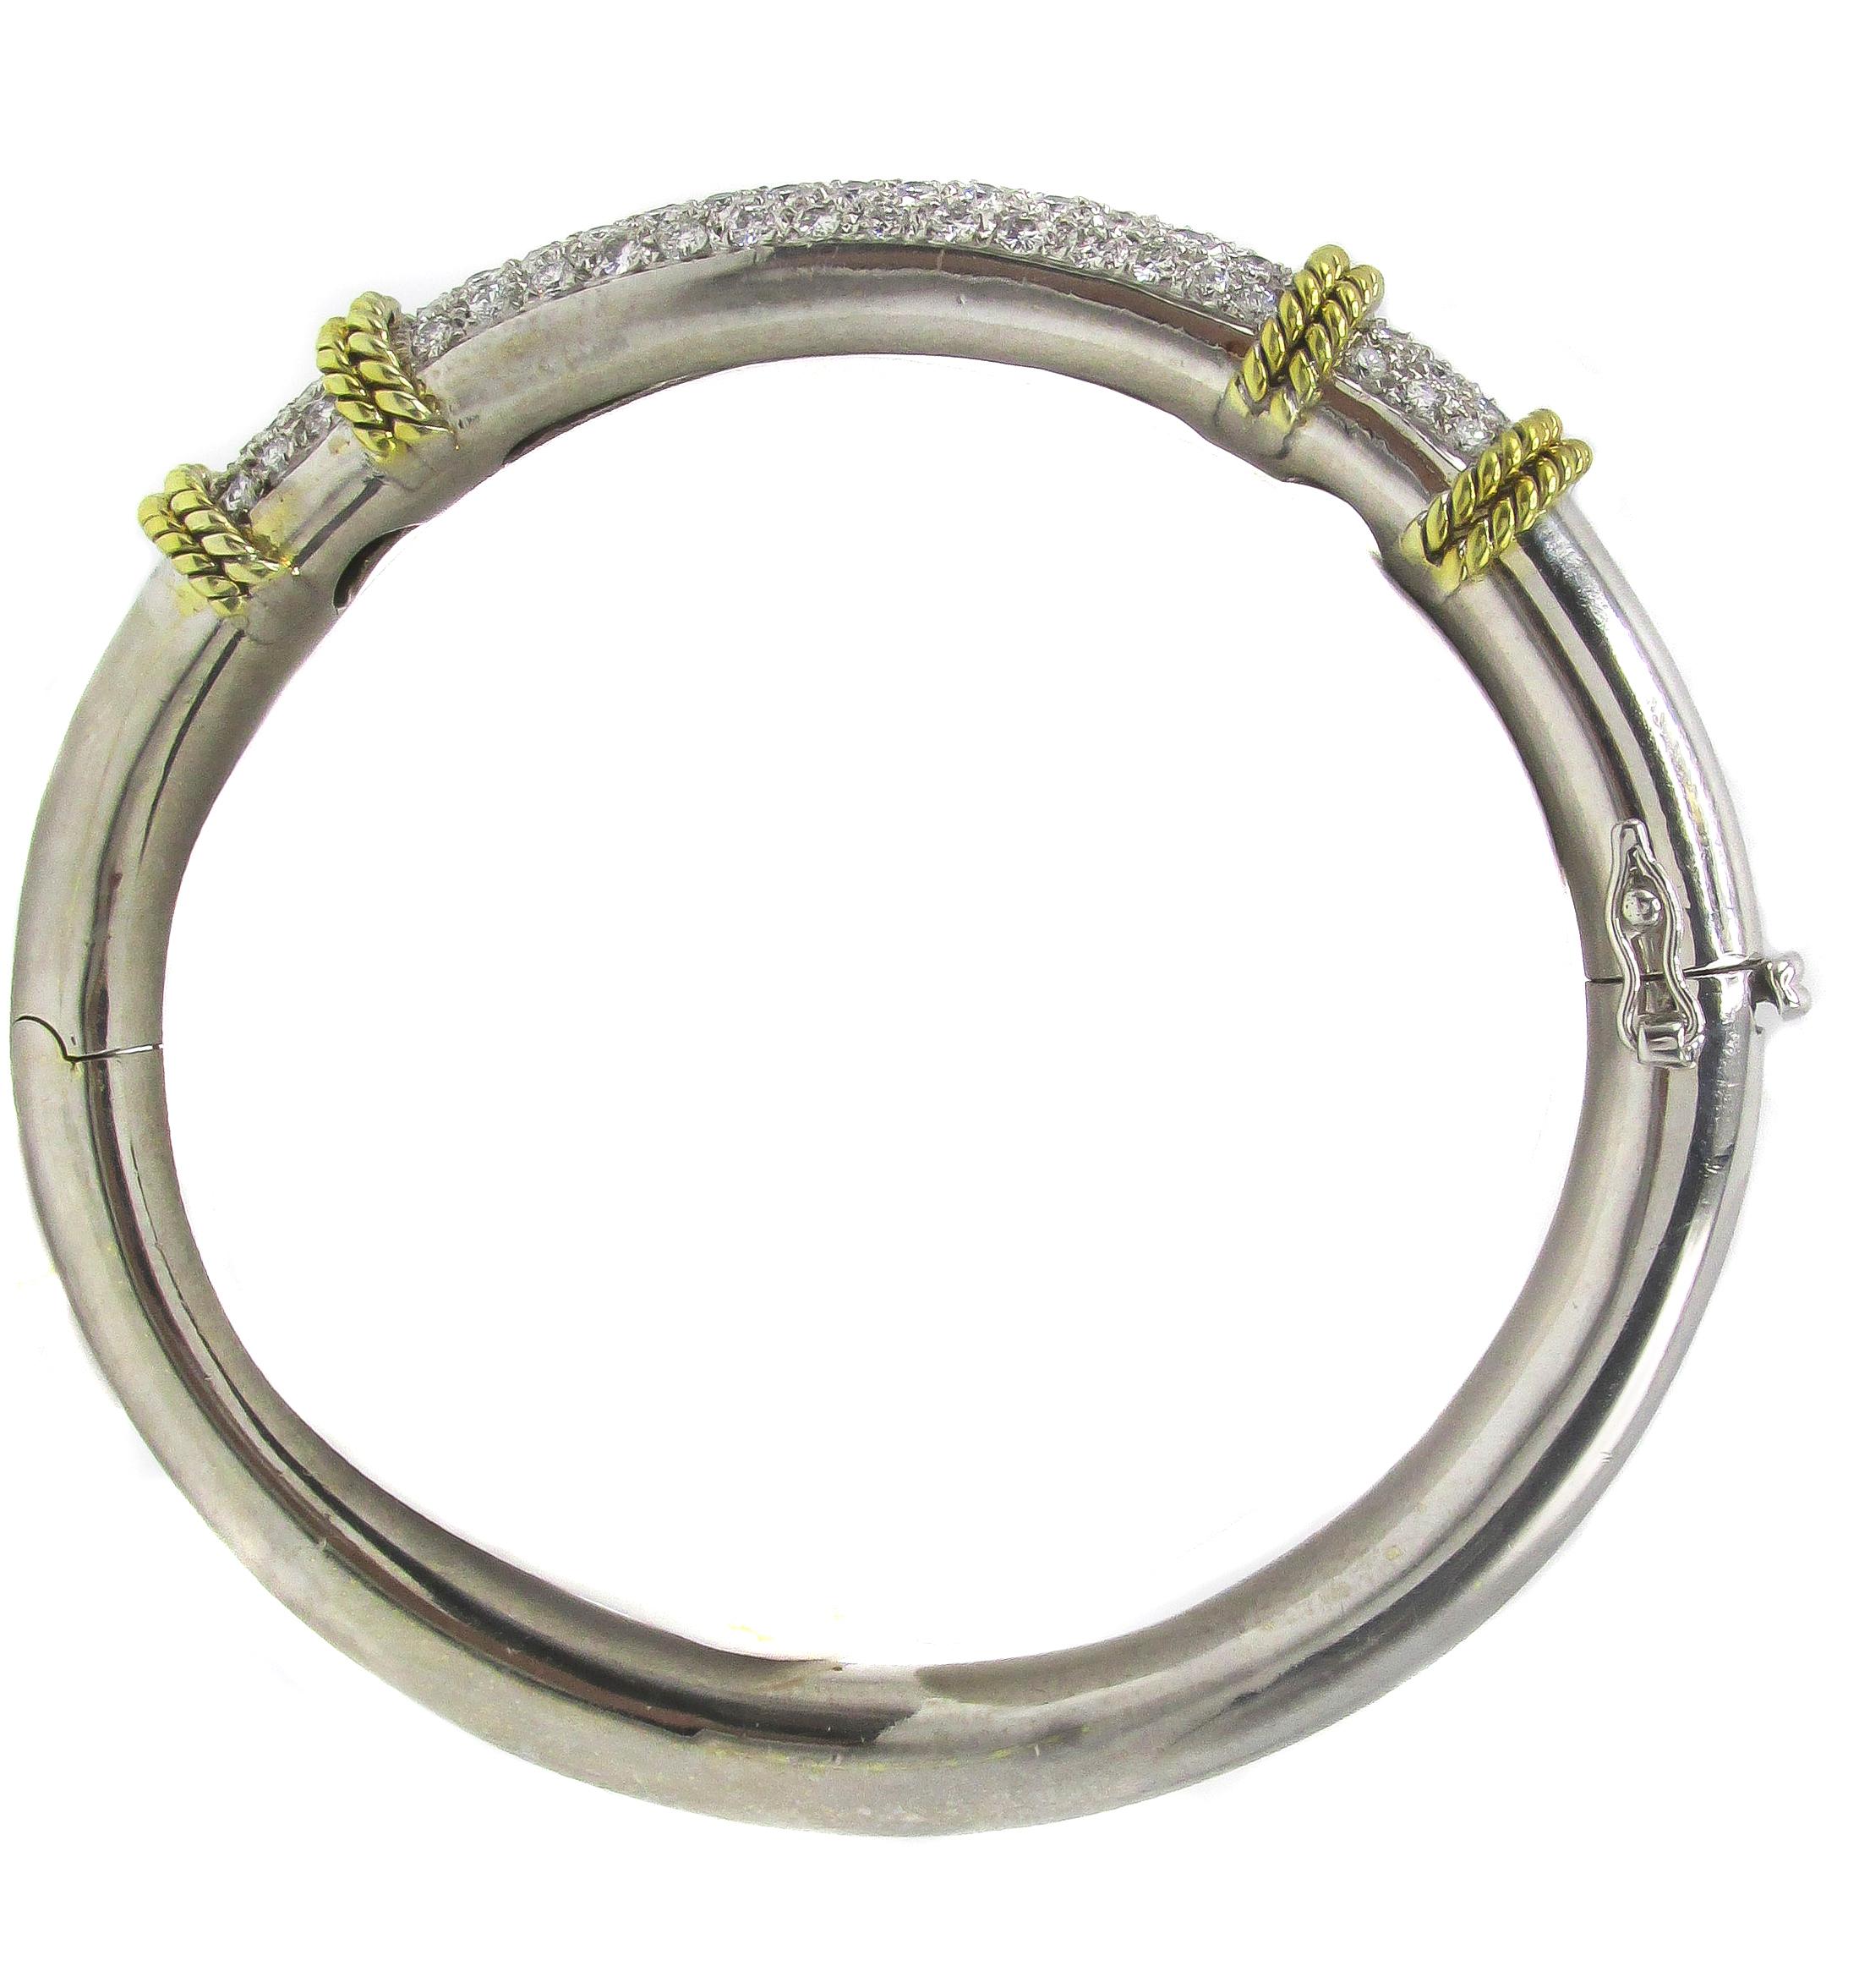 Chic 18 karat white and yellow gold bangle bracelet set with 80 bright white round brilliant cut diamonds weighing approximately 2.25 carats. The meticulously pave set diamonds show off an amazing sparkle and are elegantly separated into 3 sections